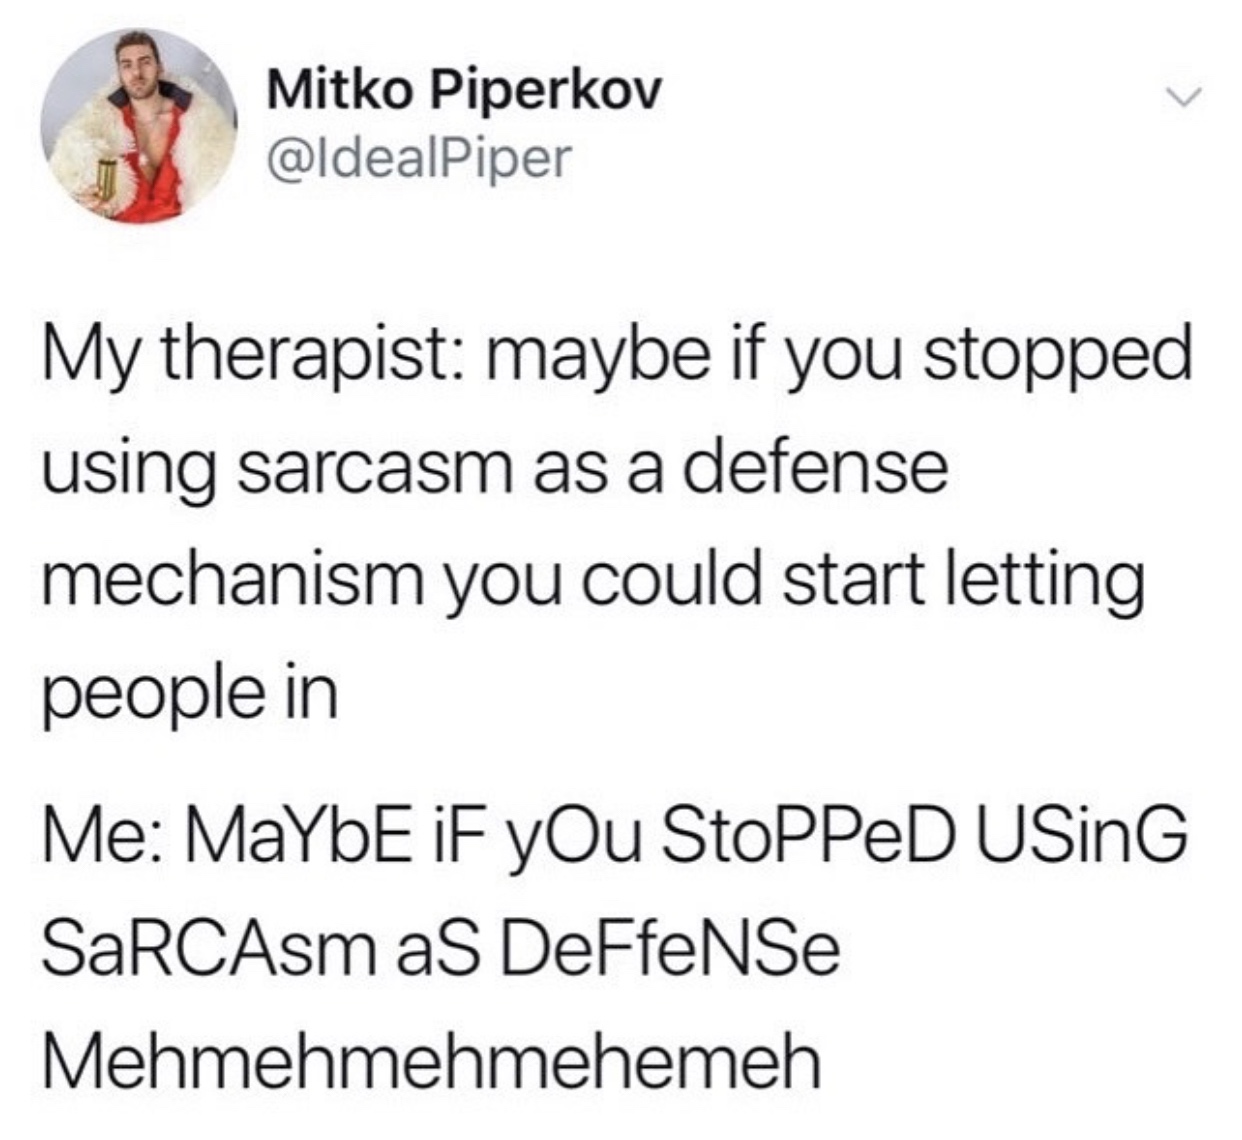 Internet meme - Mitko Piperkov My therapist maybe if you stopped using sarcasm as a defense mechanism you could start letting people in Me Maybe if yOu StoPPED Using SaRCAsm as DeFfeNSe Mehmehmehmehemeh